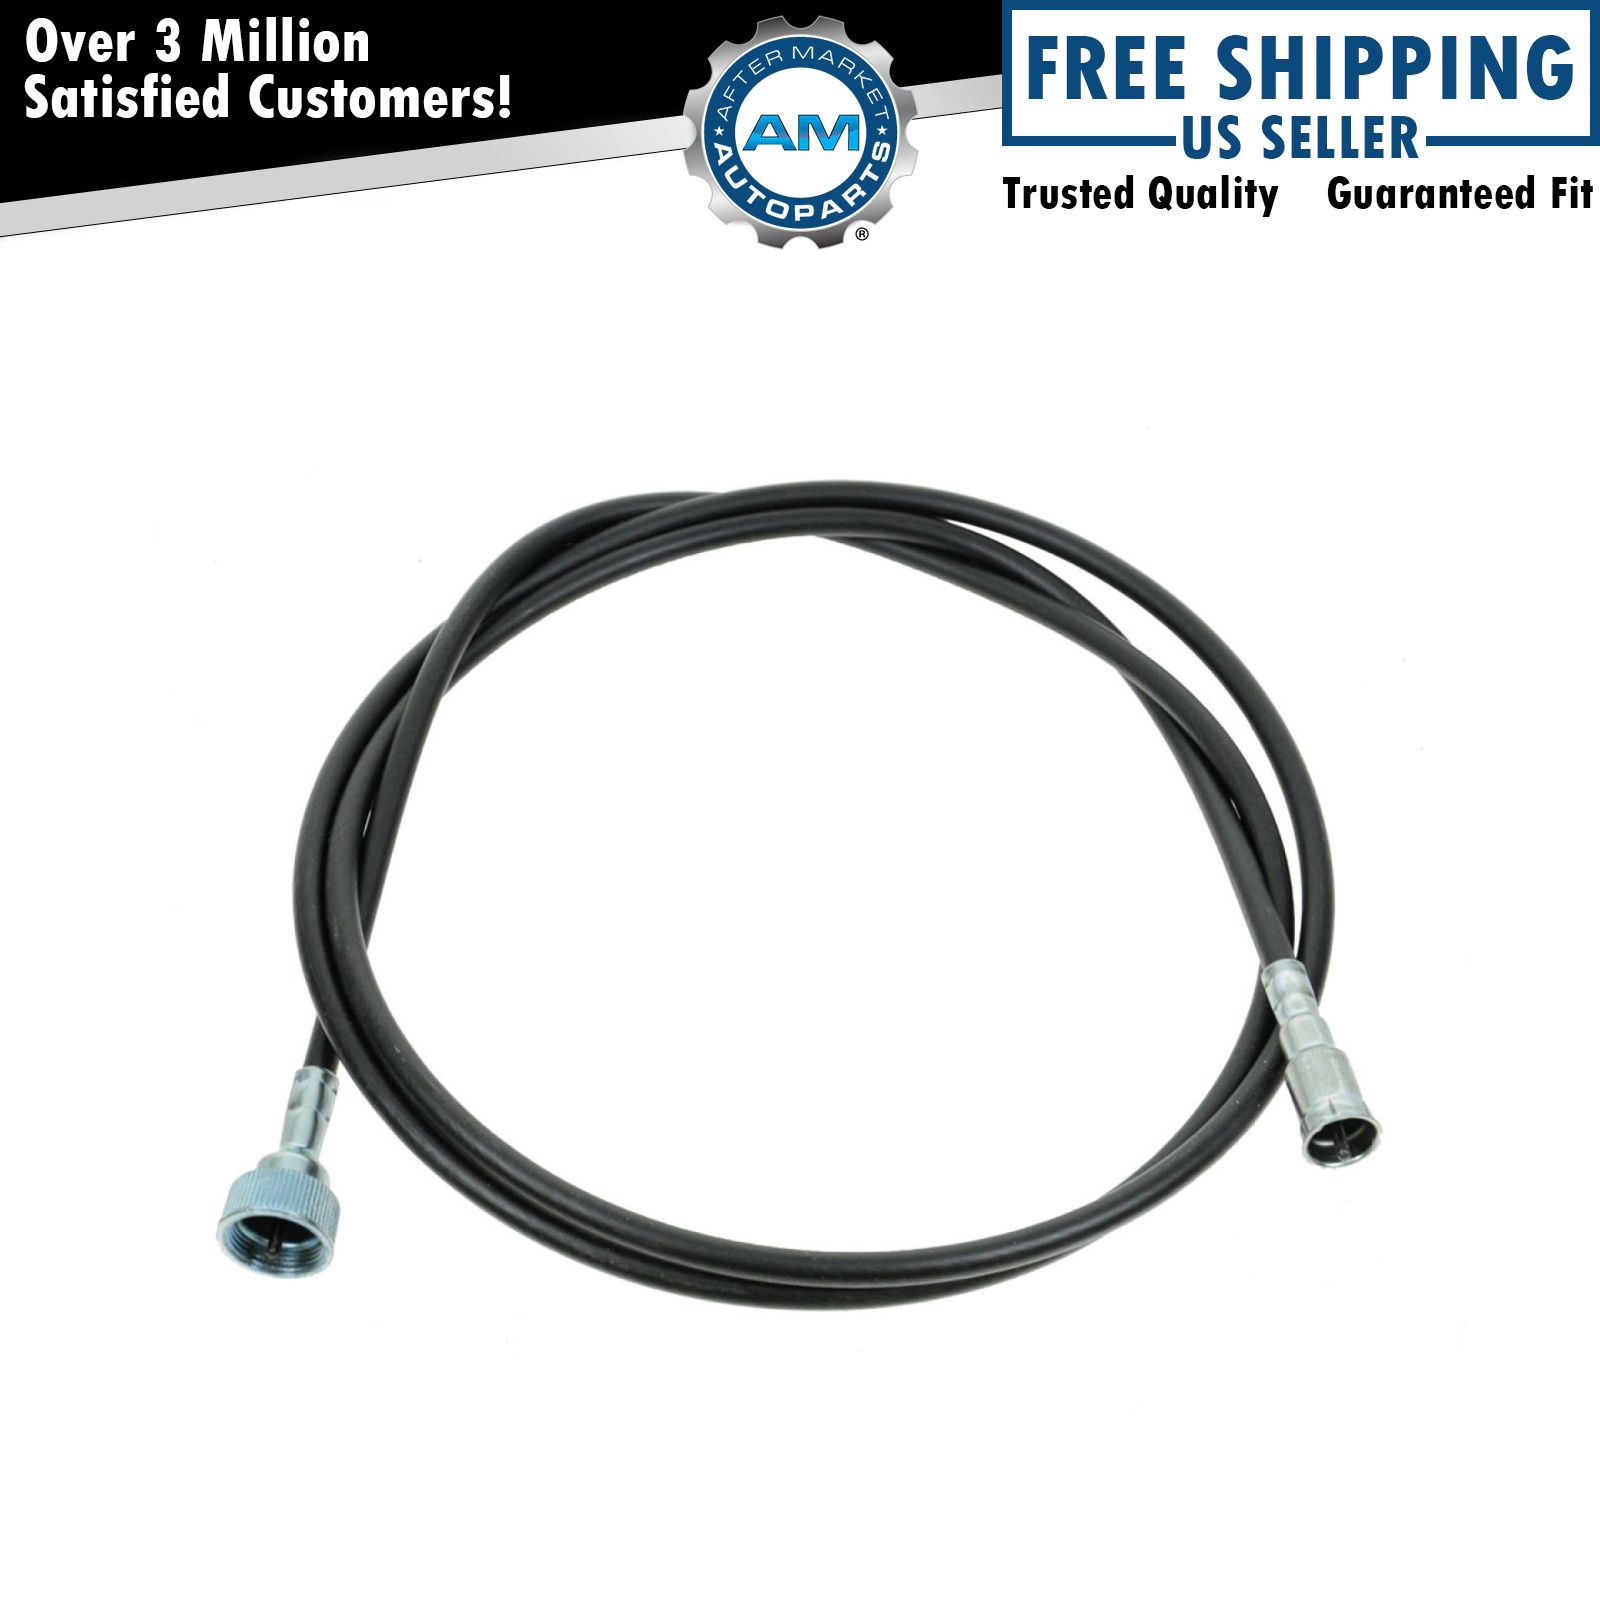 Quick Connect Speedometer Cable 80 Inch for Pontiac Buick Chevy Olds Cadillac